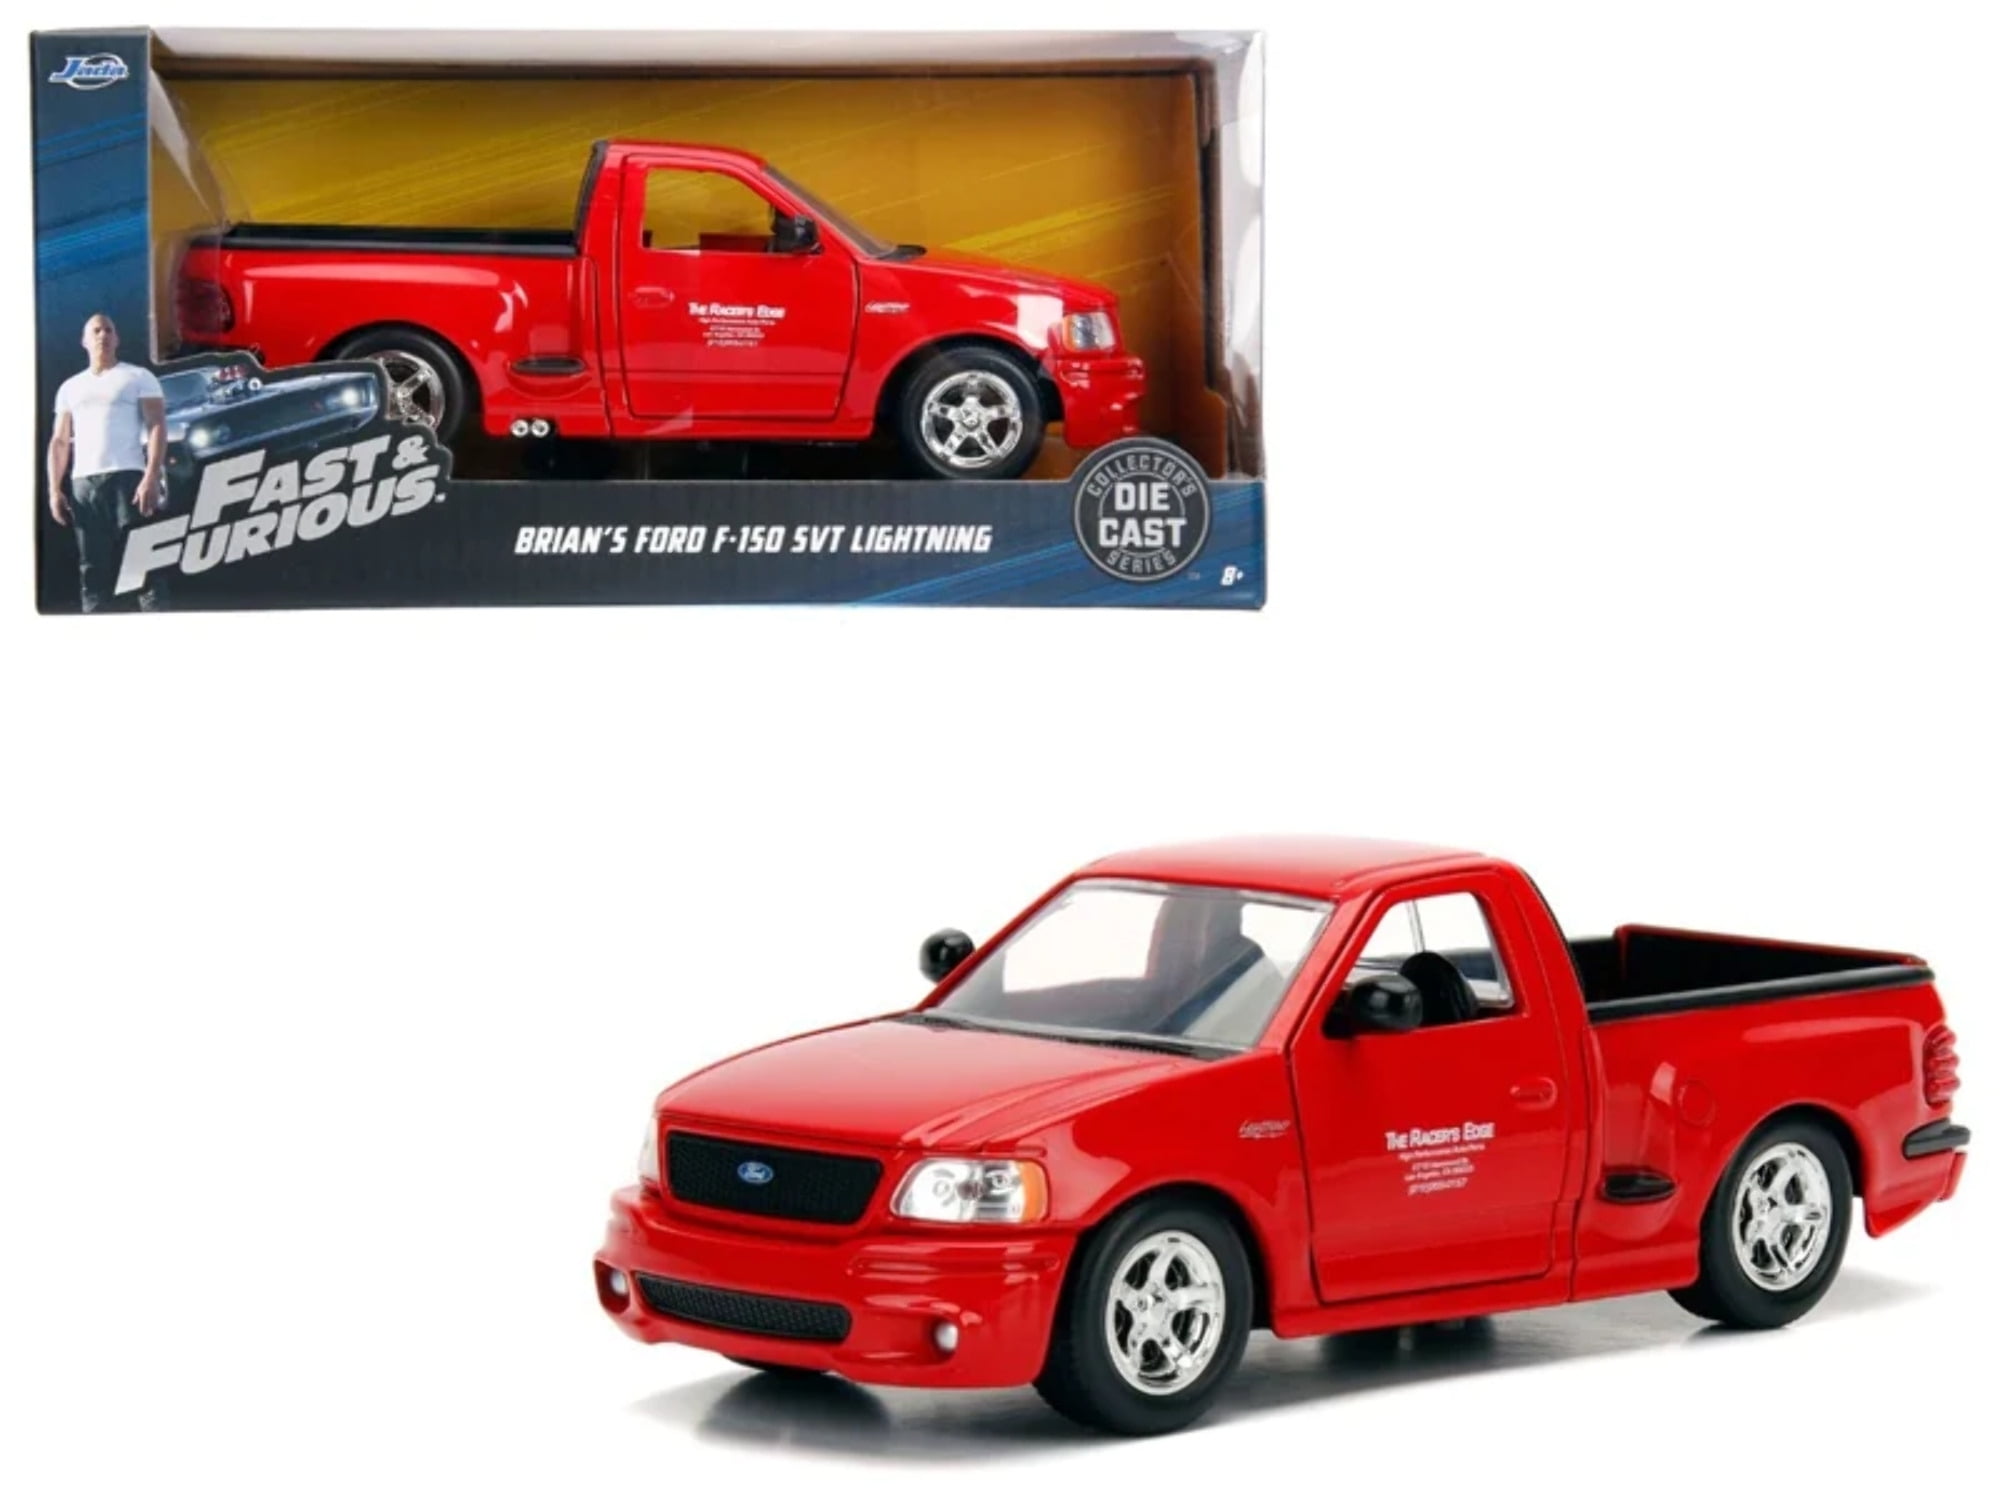 Brians Ford F-150 SVT Lightning Pickup Truck Red Fast & Furious Movie -  Endless Games, EN766719